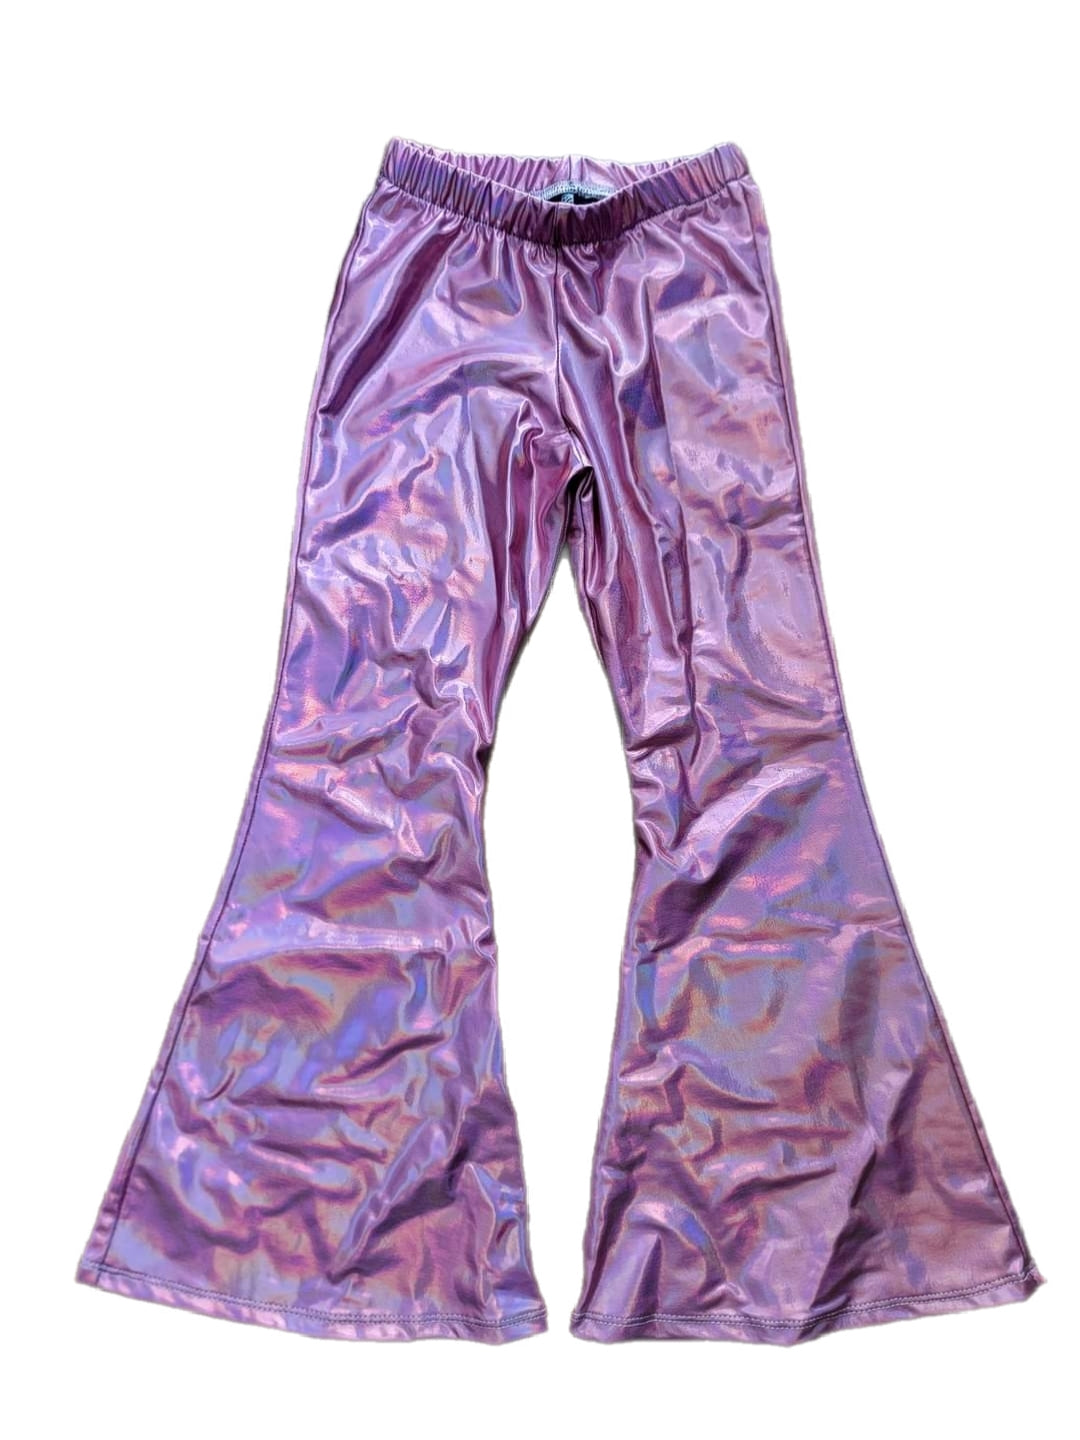 Pink Metallic Pleather Bell Bottoms, 4t (READY TO SHIP)